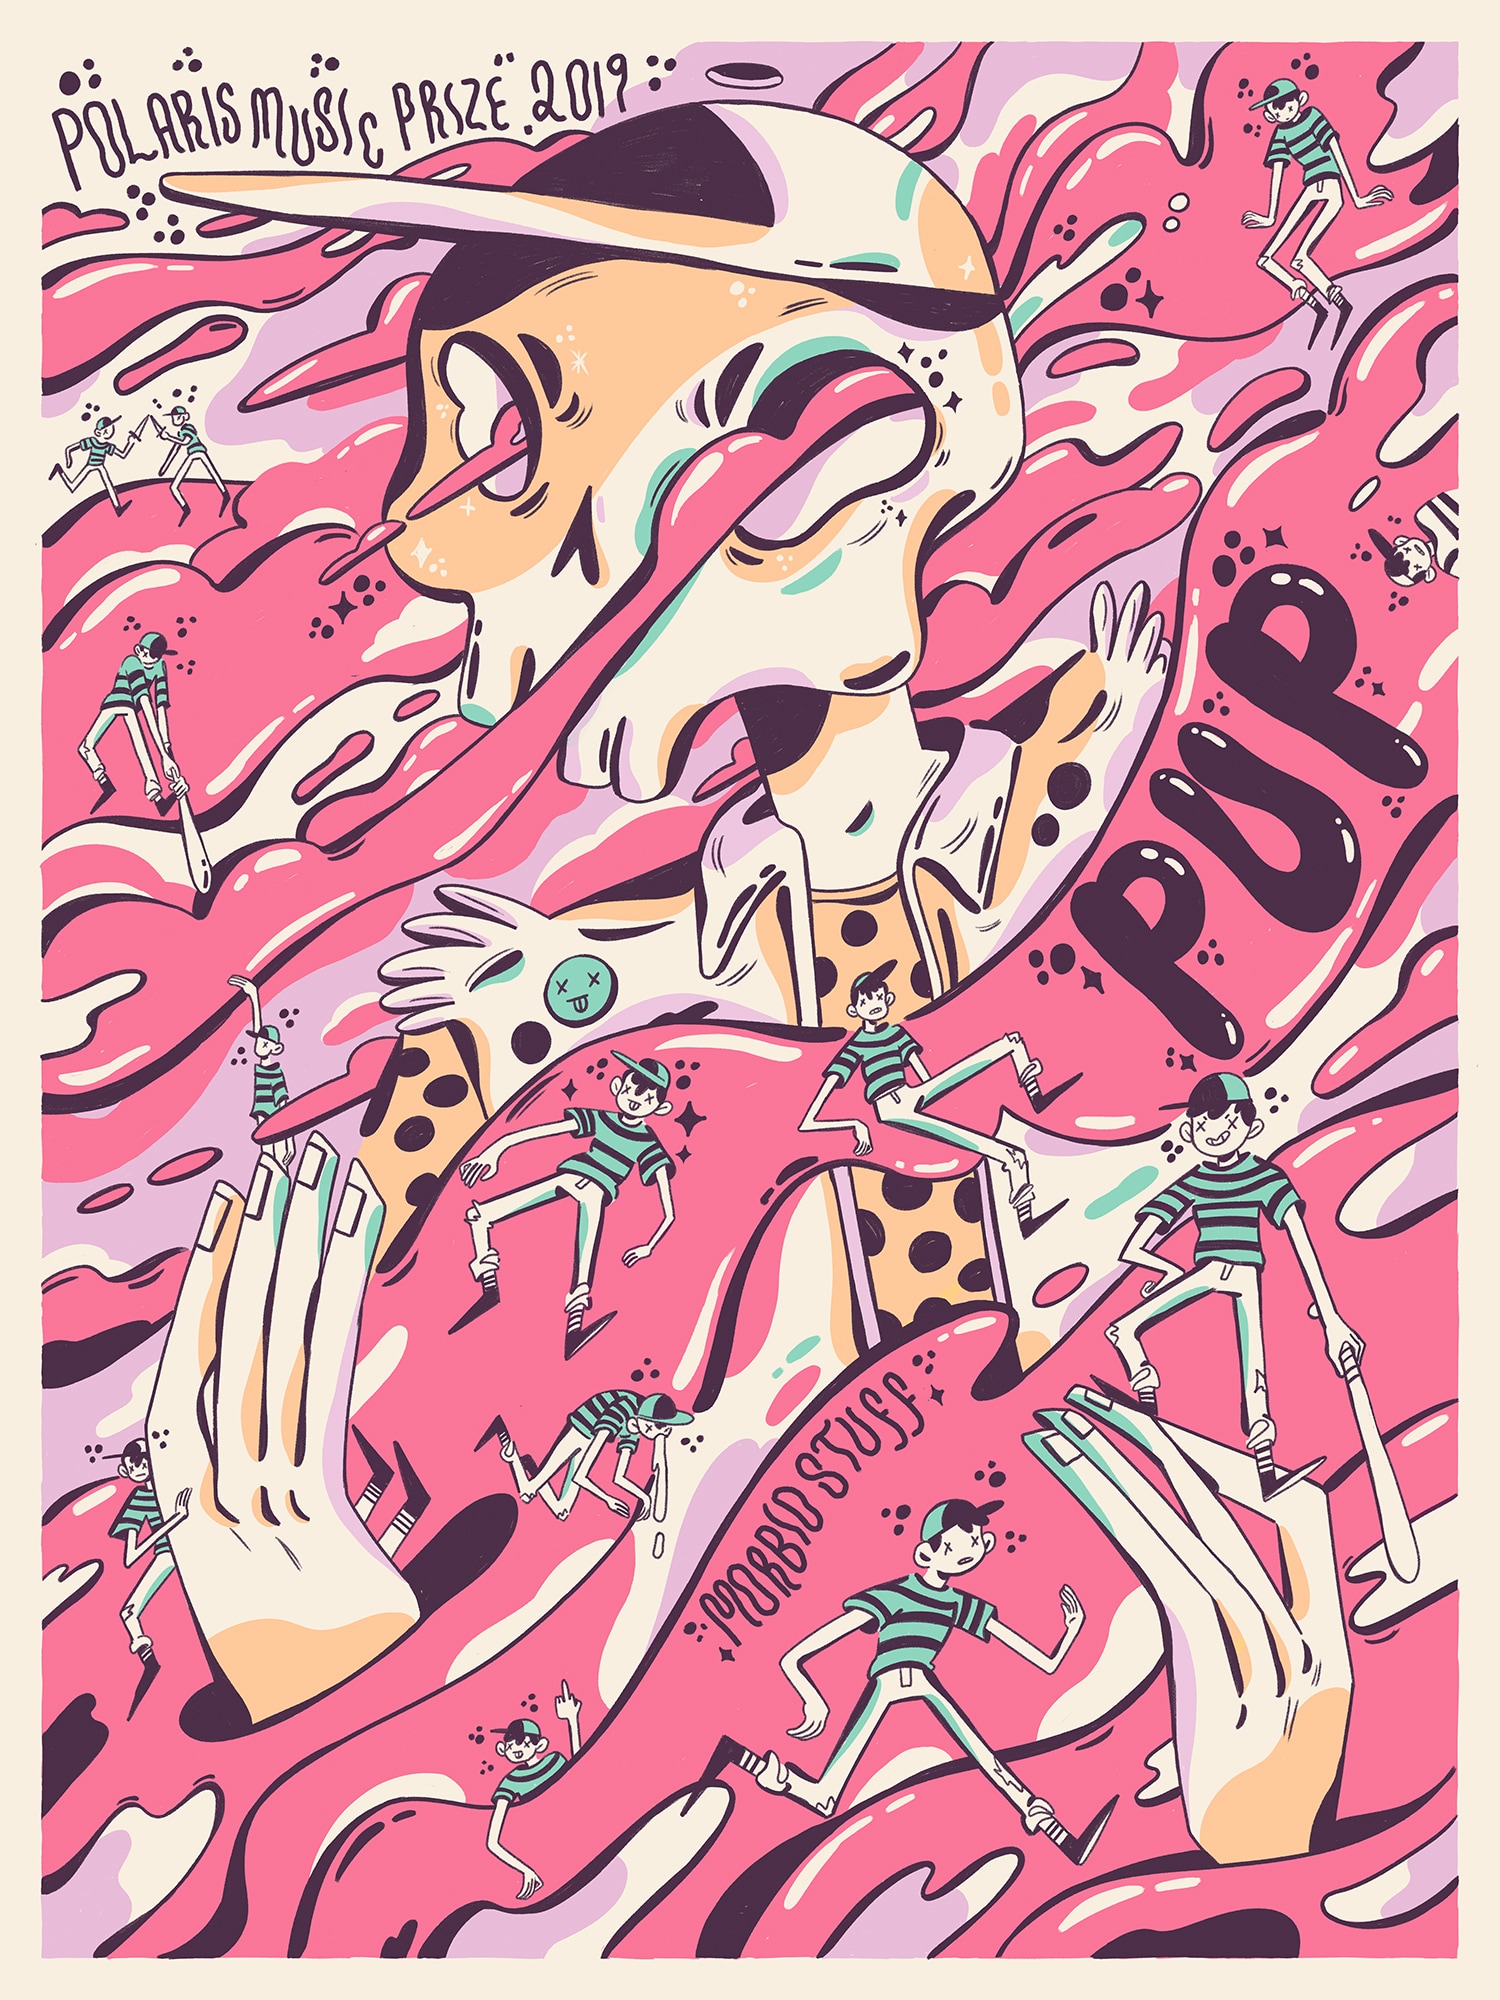  This poster promoting PUP's performance at the 2019 Polaris Music Prize Gala features a skeleton dressed in a dotted shirt and a sleeveless biker's jacket. The skeleton raises its hands while it is being swept away by a pink liquid. Some of the pink liquid flows through the skeleton's eyes. Drawn images of a young boy wearing a green baseball cap with white pants and a green and black striped shirt appears in multiple places on the poster. Each image of the boy depicts him in a different pose such as running; sitting; sword fighting or holding a baseball bat. In the top left corner of the image the words "Polaris Music Prize 2019" appear in a dark shade of purple. On the right centre of the poster the word "PUP" appears in a dark shade of purple. In the low centre of the poster the words "Morbid Stuff" appears in a dark shade of purple.